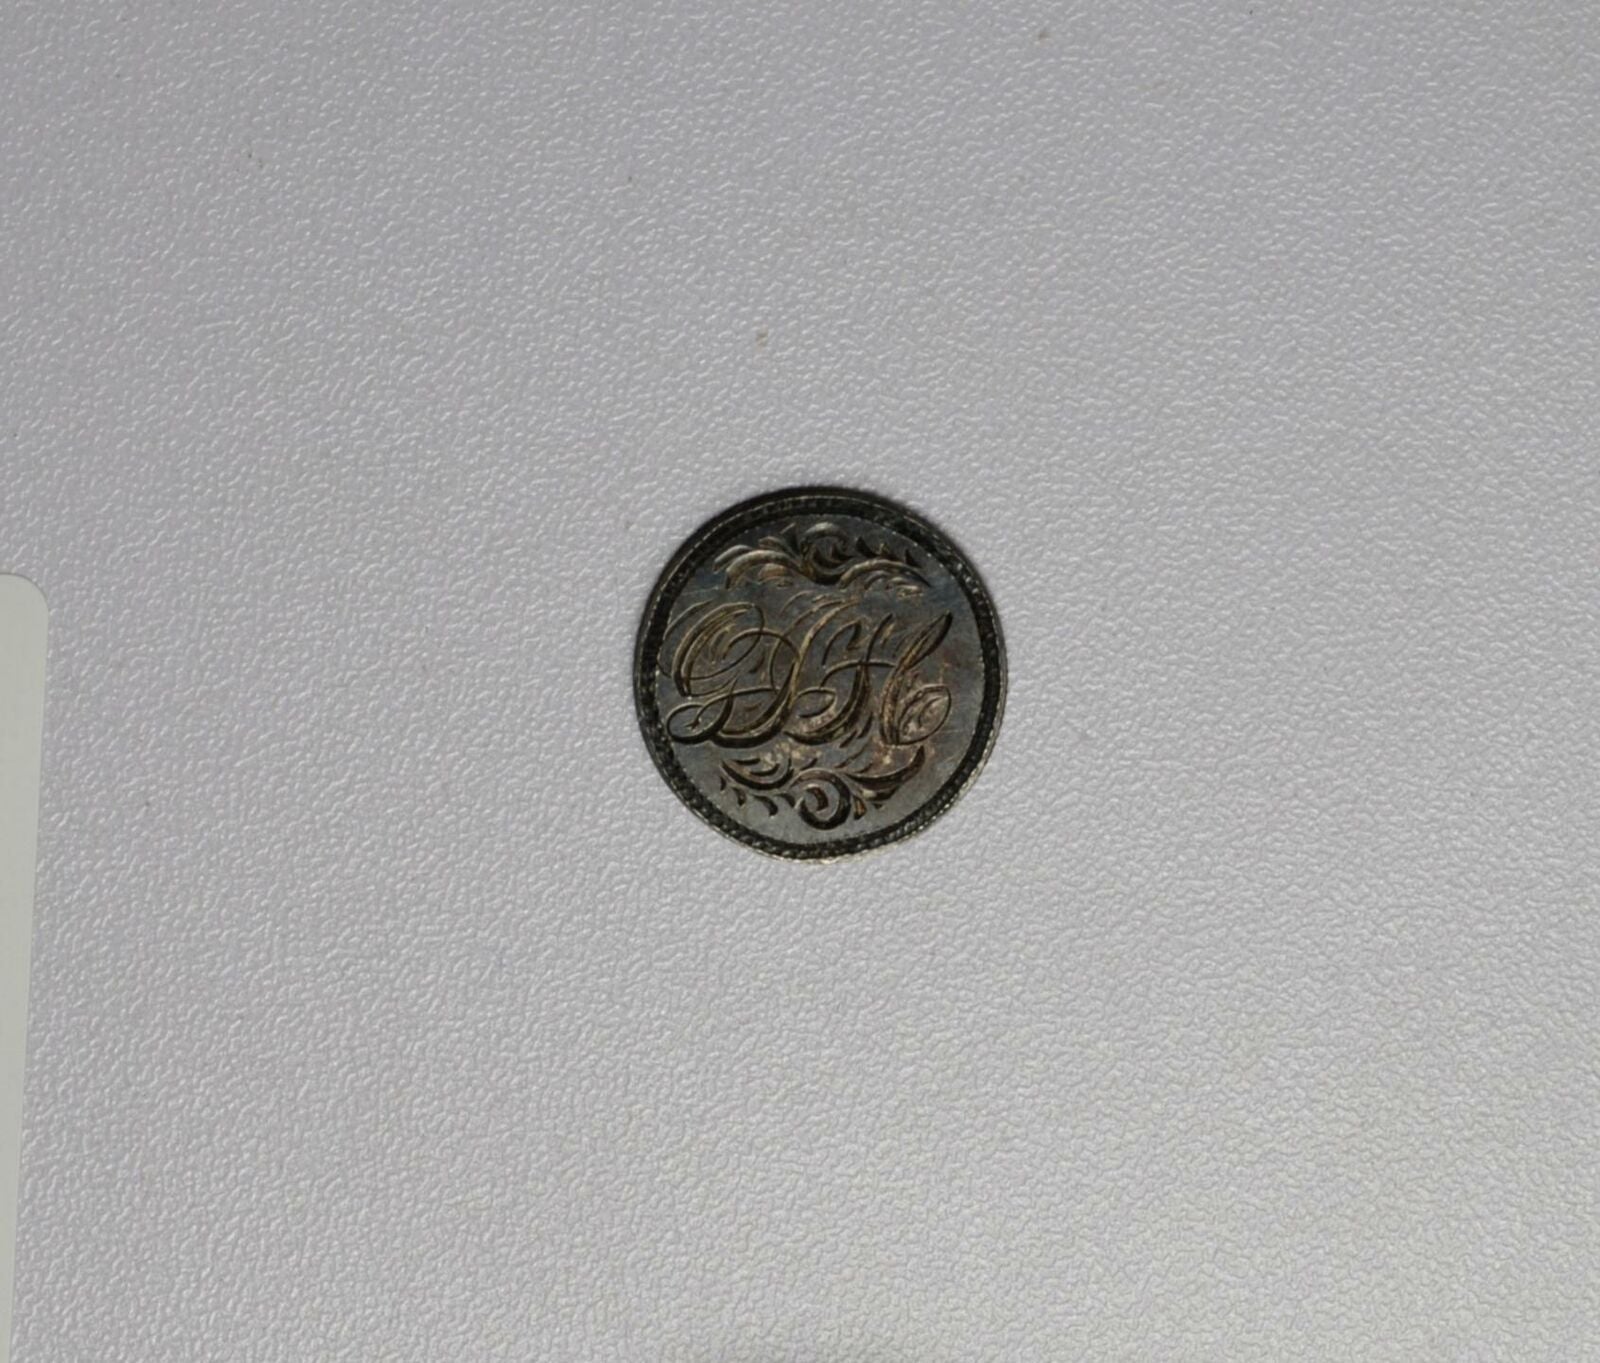 1884 SEATED DIME LOVE TOKEN ENGRAVED "DFC" XF!! NO HOLE! #9295